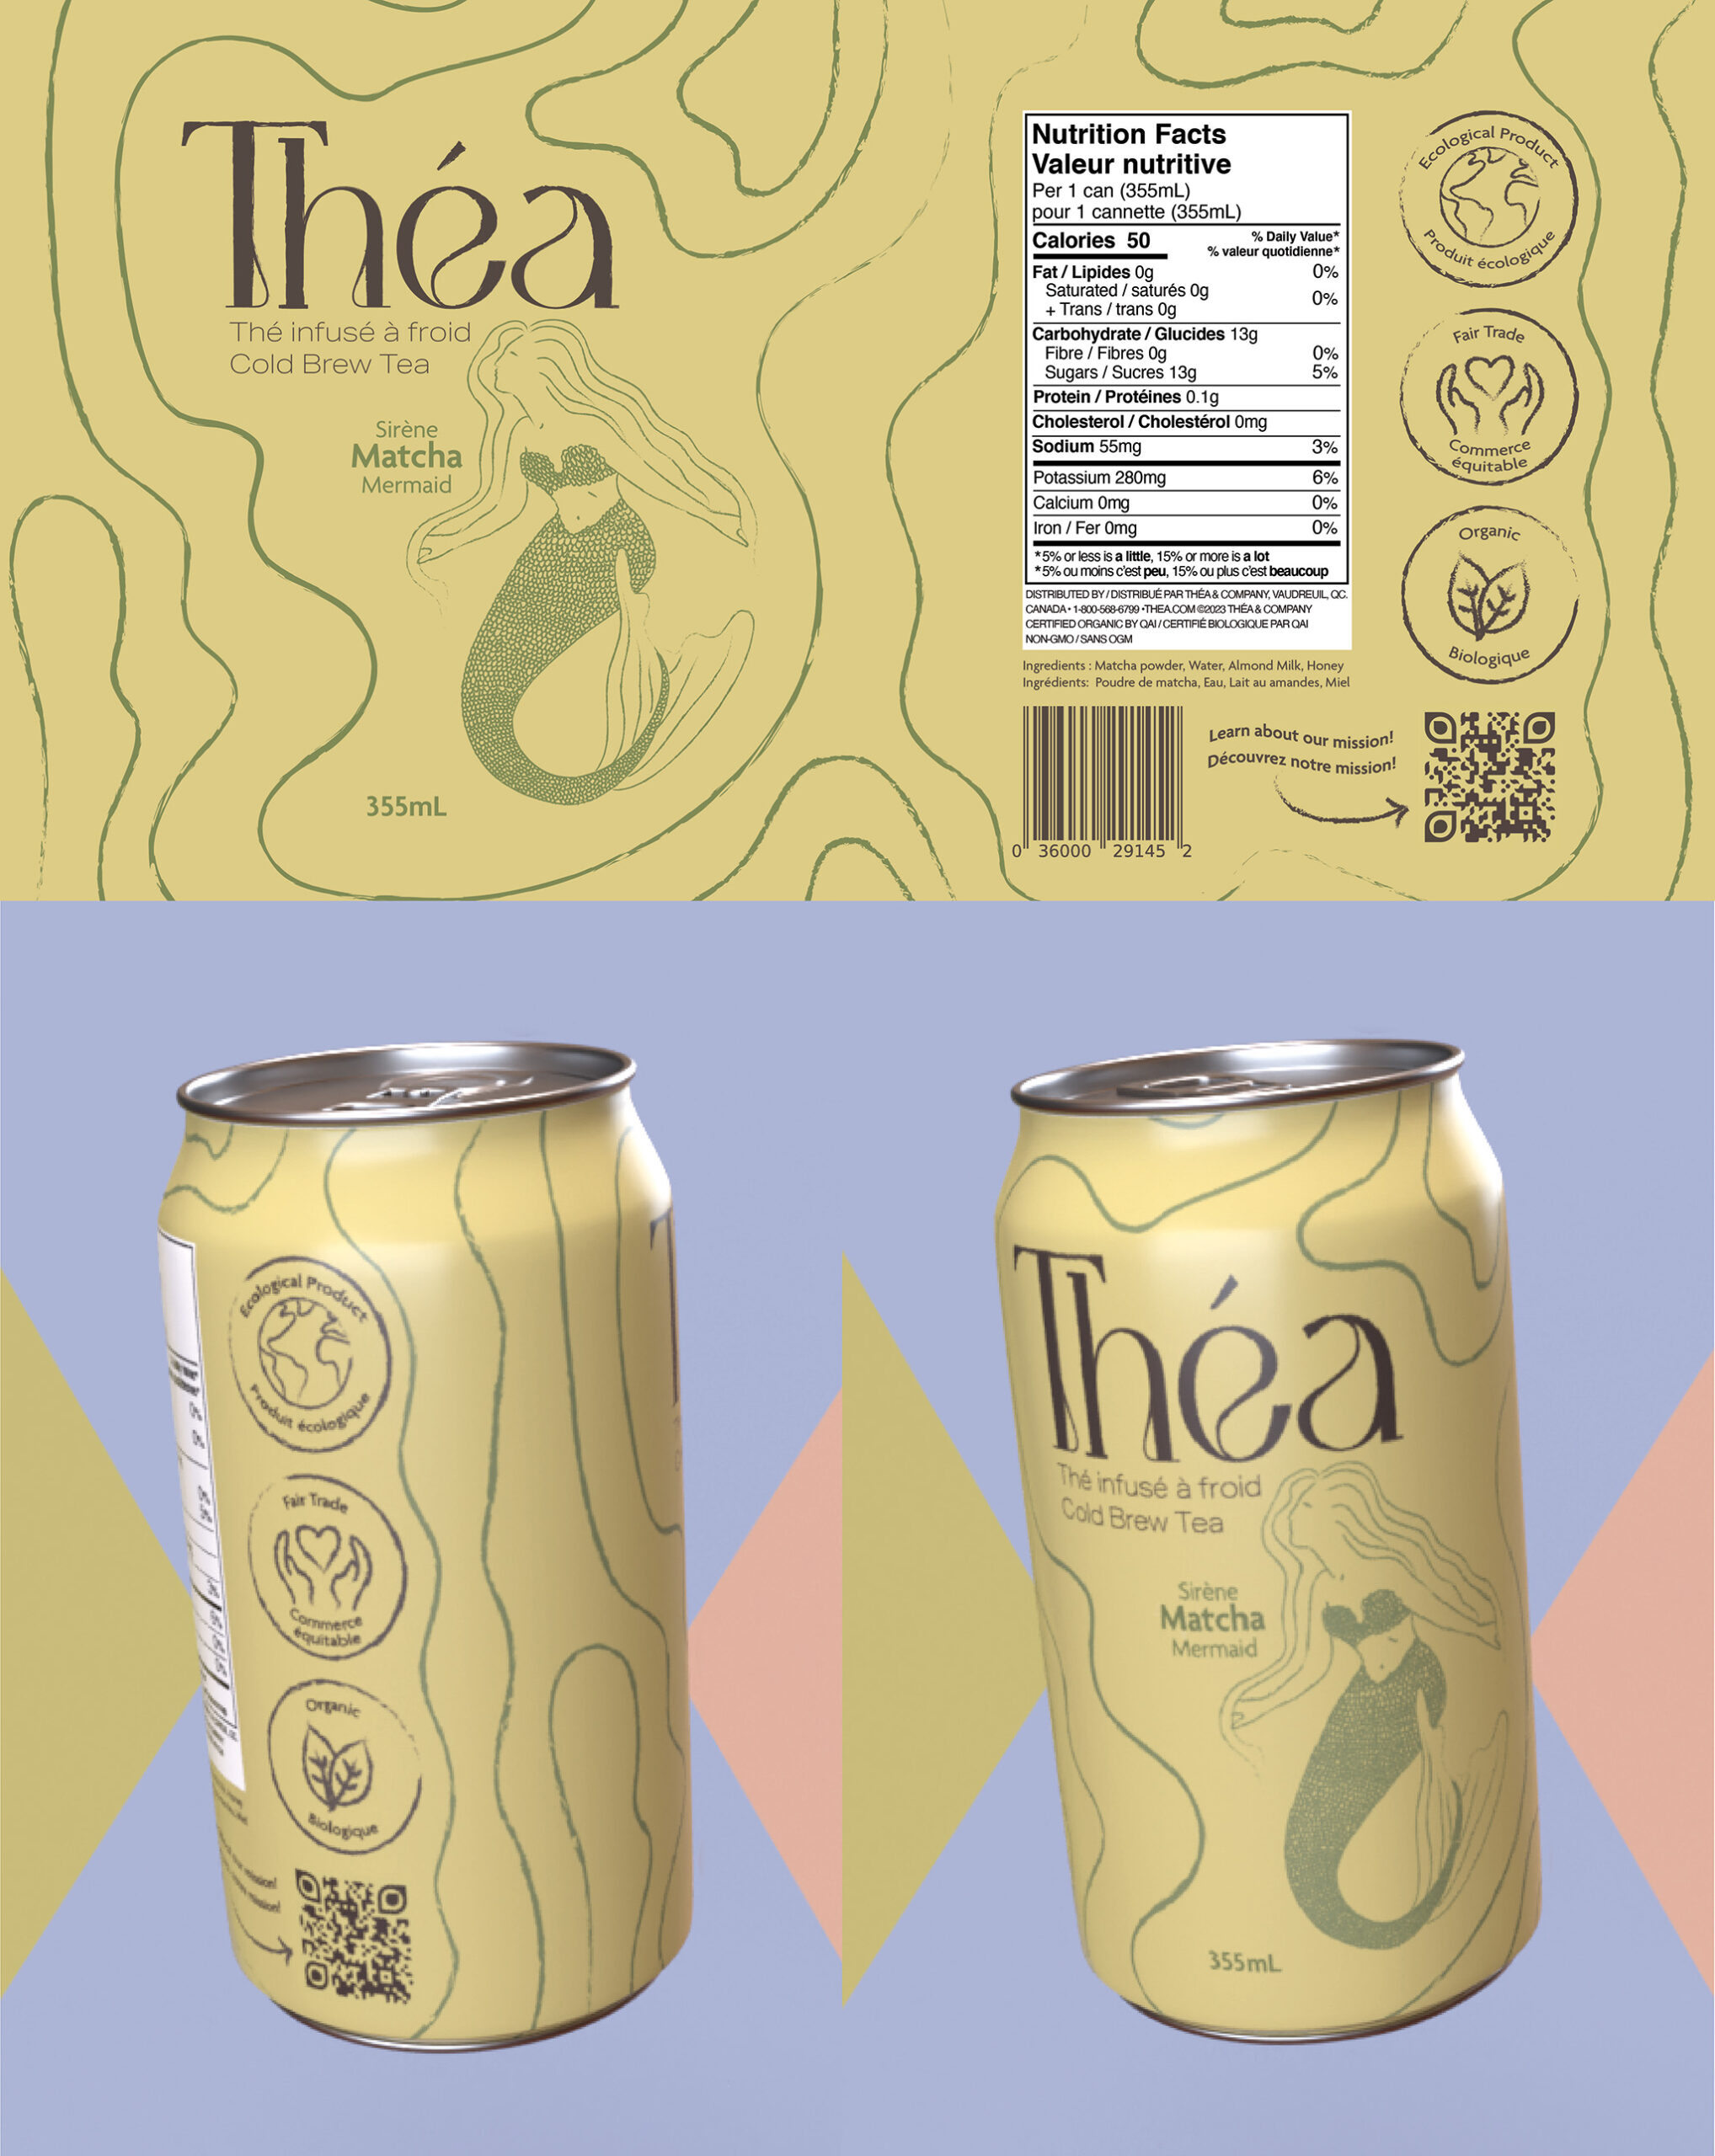 Mockup and flat design of label for matcha flavoured tea in a can.